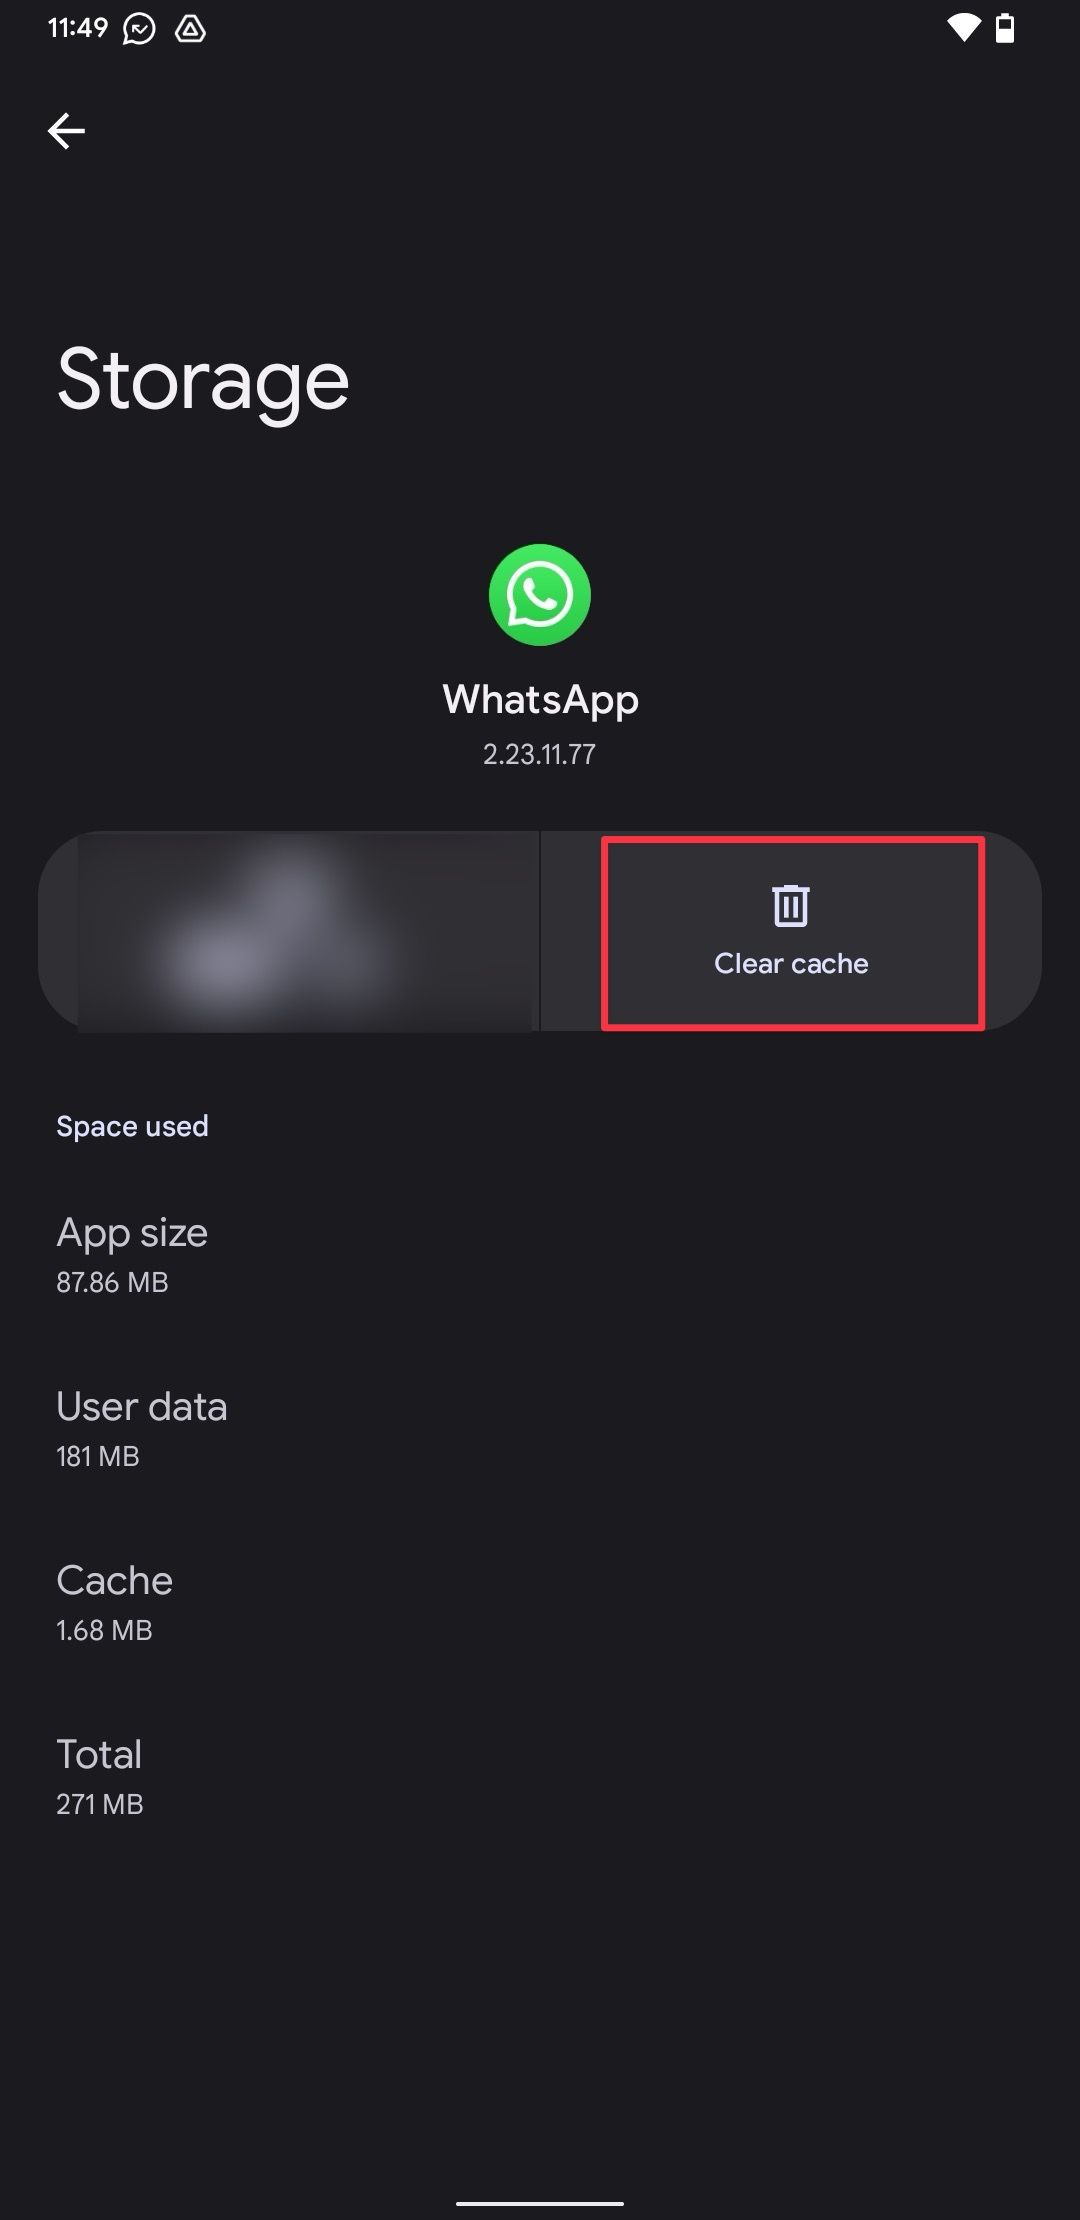 Clearing cache of WhatsApp Android app